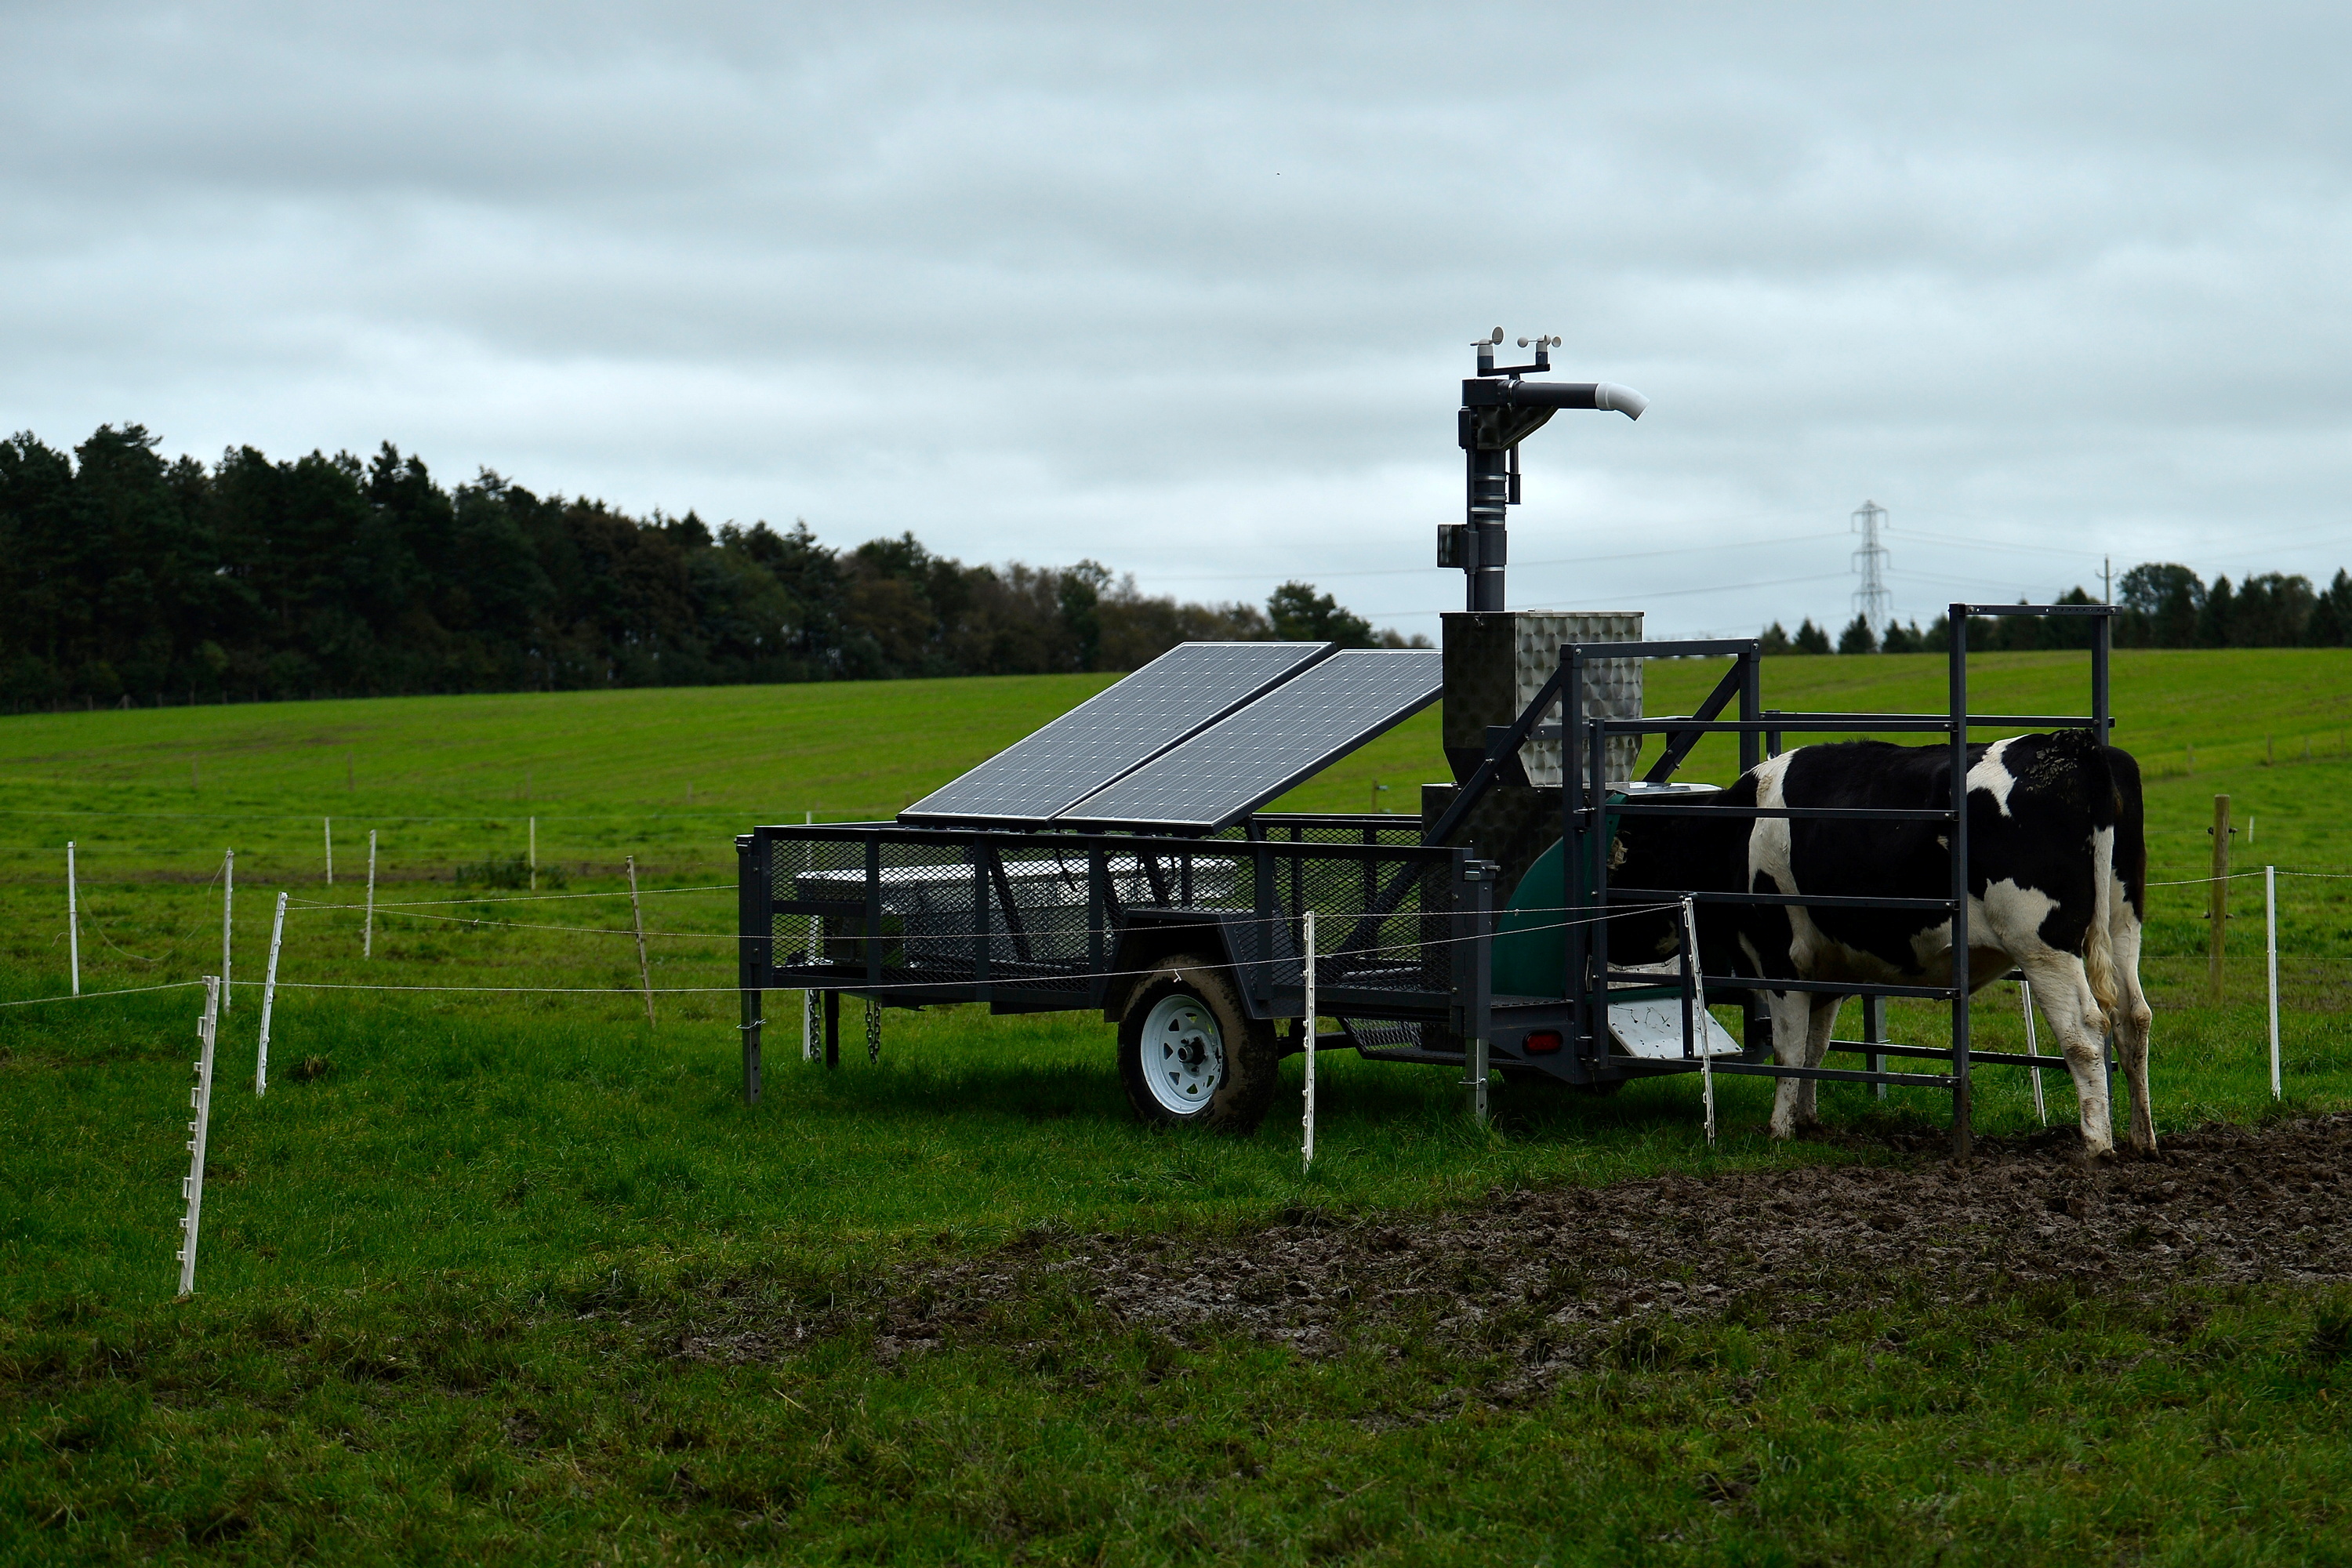 Dairy cattle that are participating in a trial of being fed seaweed to offset methane emissions gather around the solar powered methane measuring machine at the AFBI (Agri-Food and Biosciences Institute) research farm in Hillsborough, Northern Ireland, October 7, 2021.   REUTERS/Clodagh Kilcoyne 